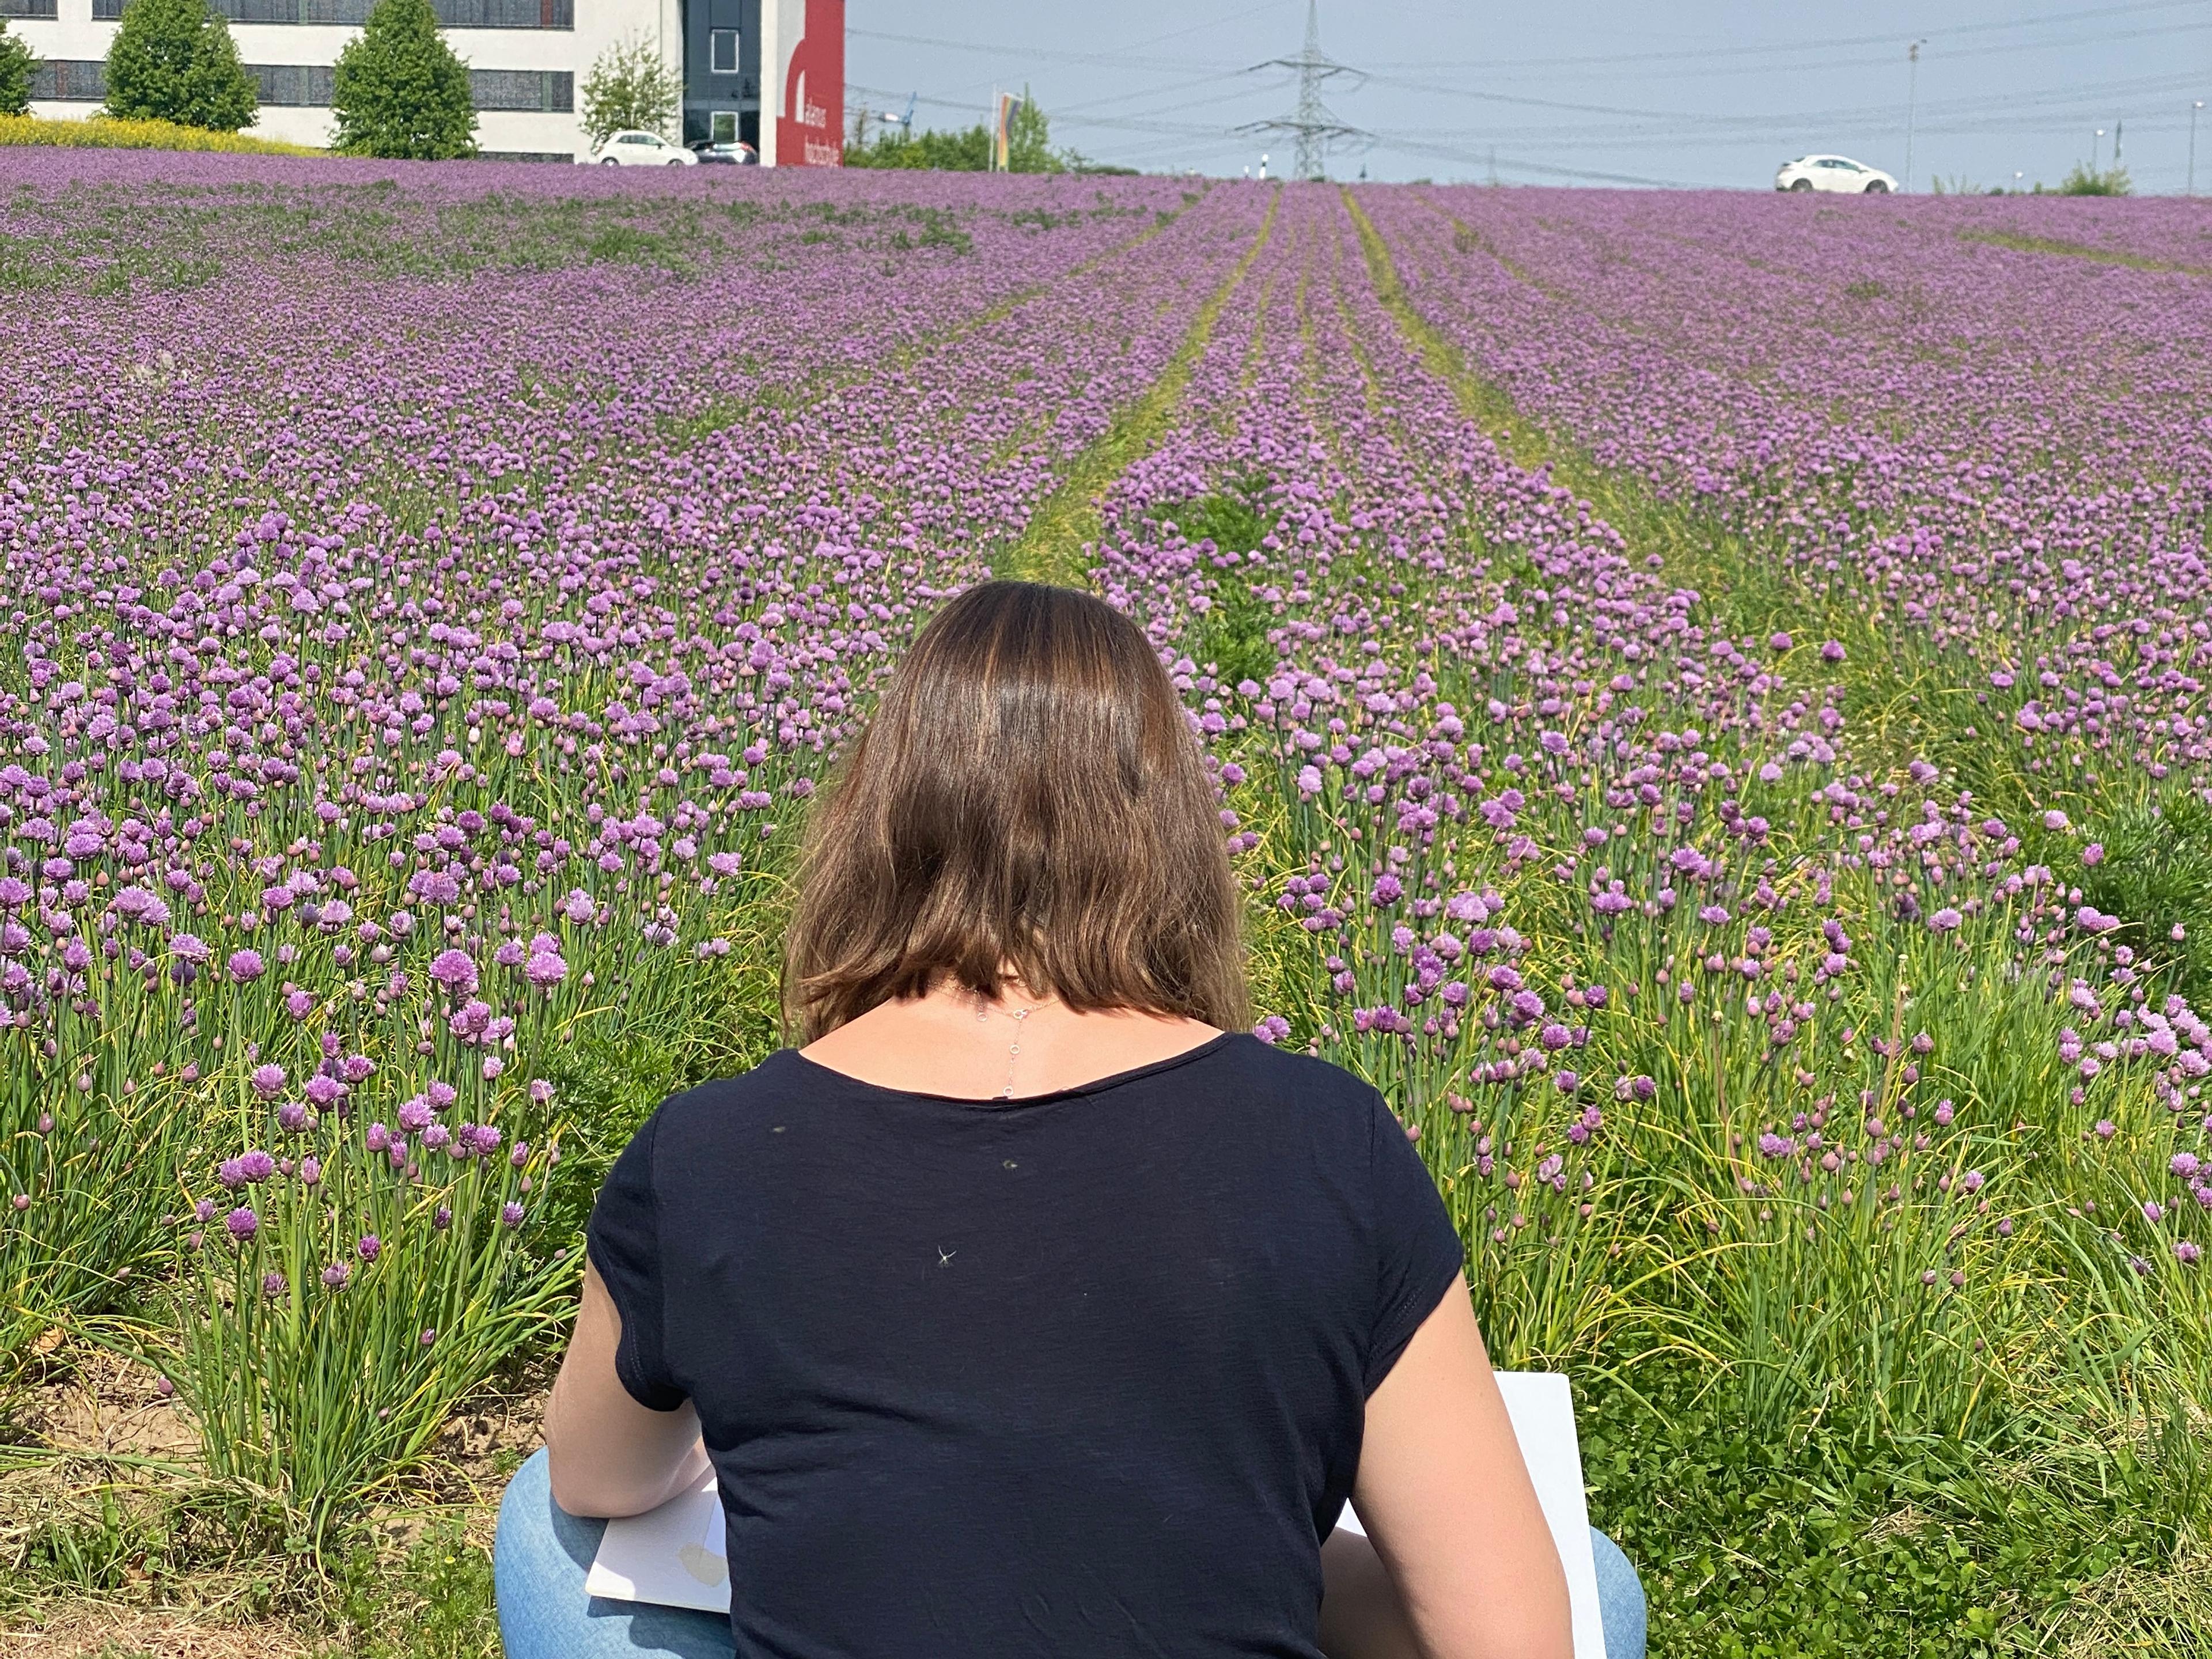 A women is sitting on the ground in front of a field with purple flowers. She is drawing the landscape. A cubic building is visible on the horizon.